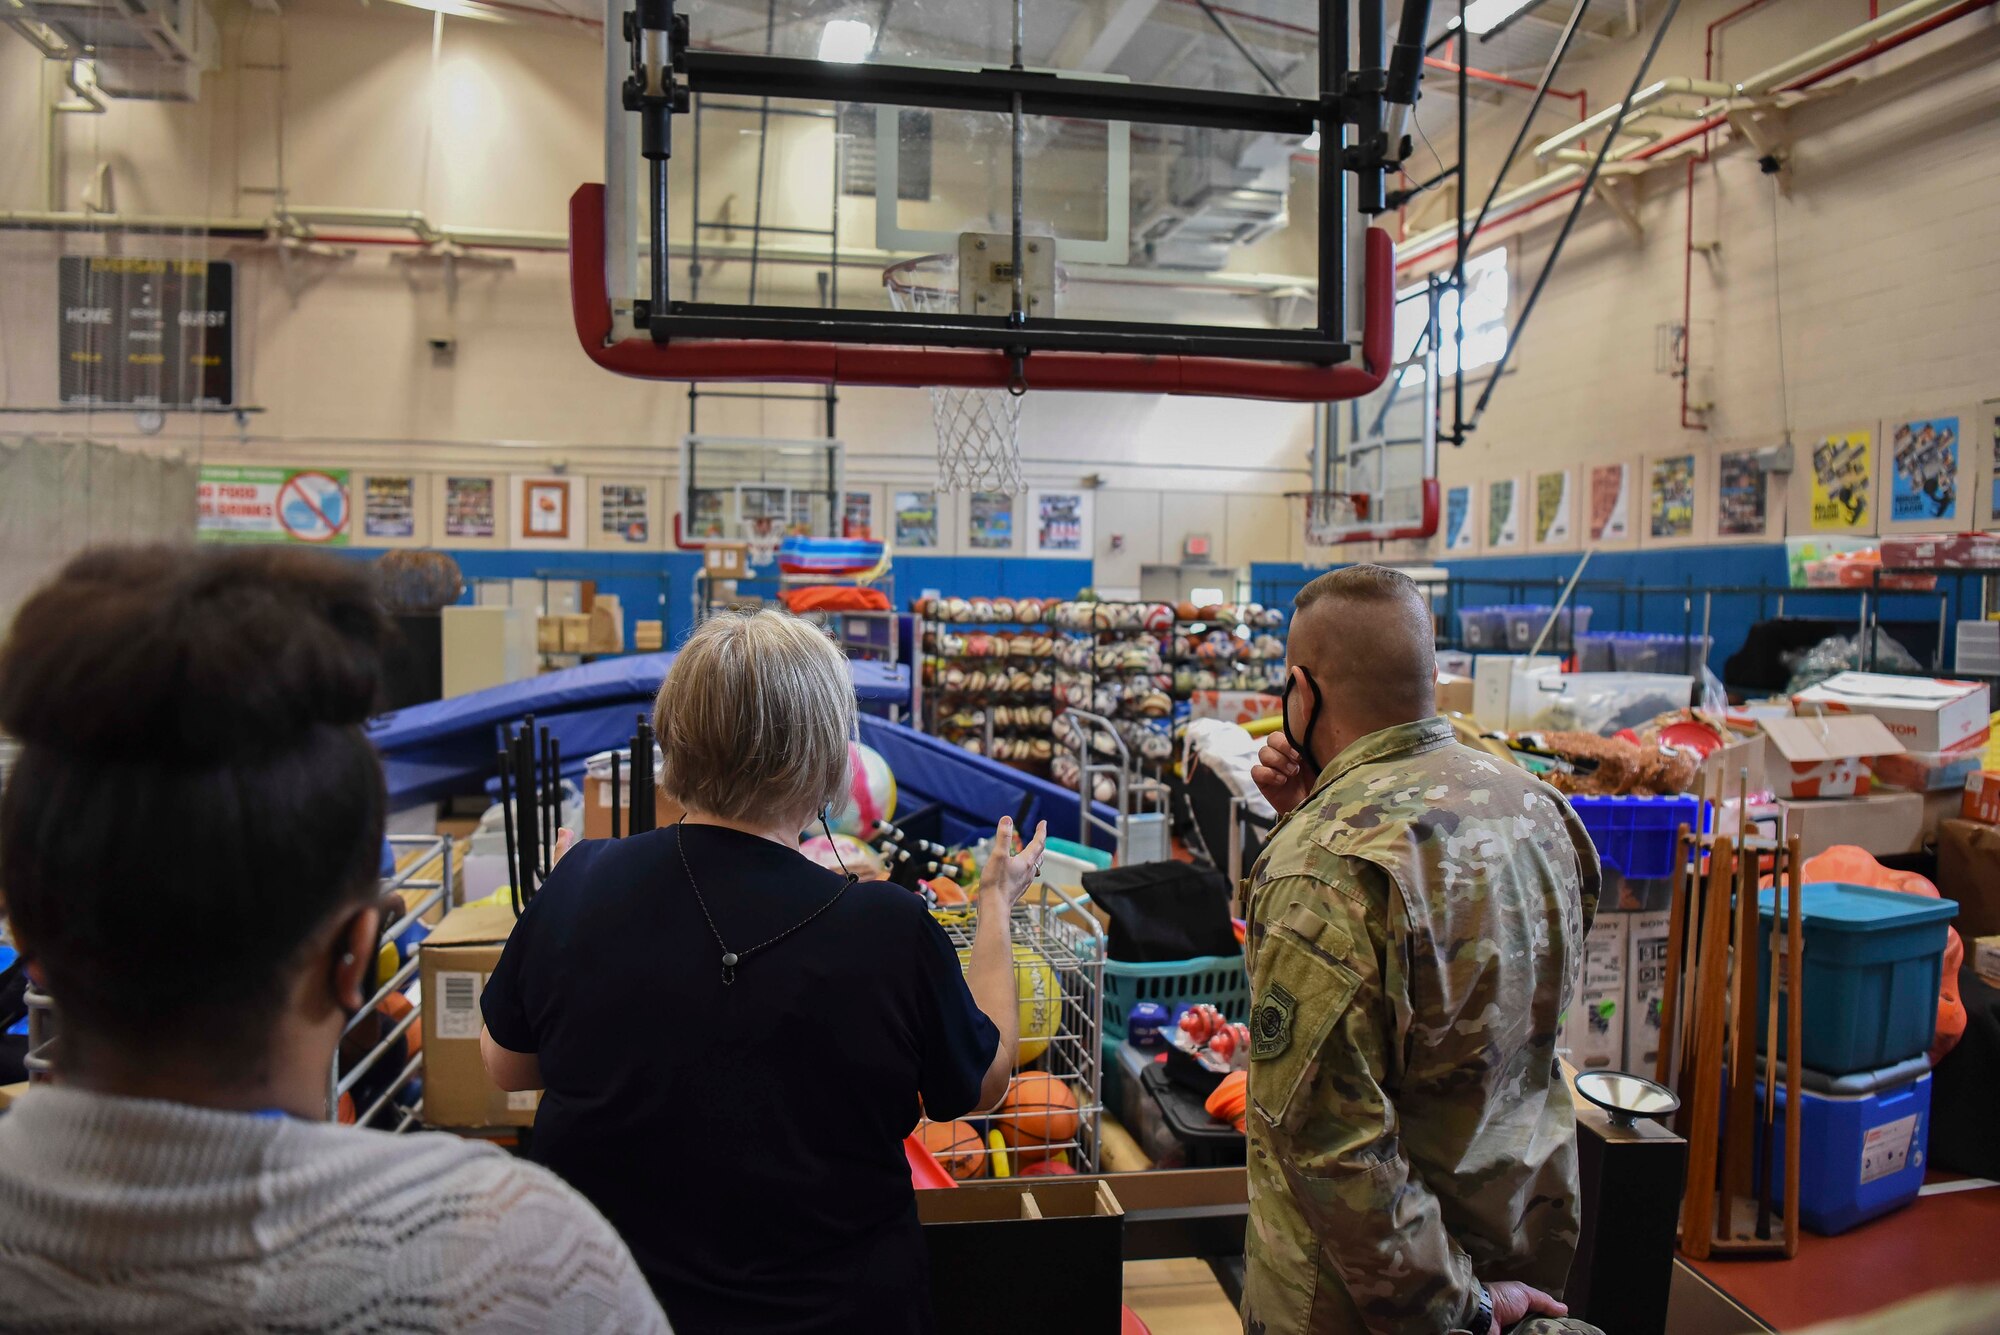 A military member and a Lunney Youth Center staff member look at the equipment the center has in a gym.